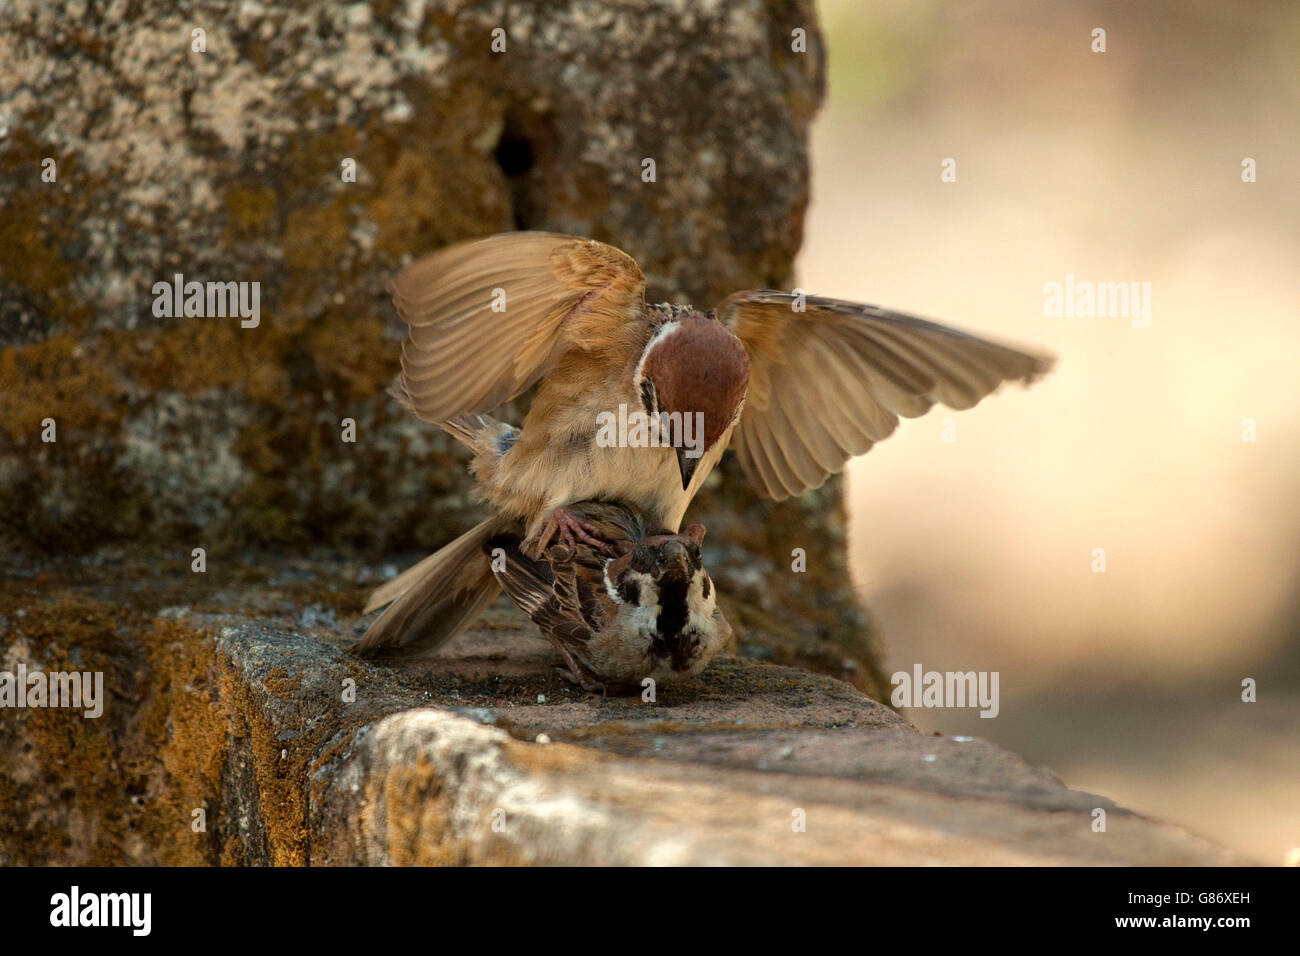 Two birds mating, Jember, Indonesia Stock Photo